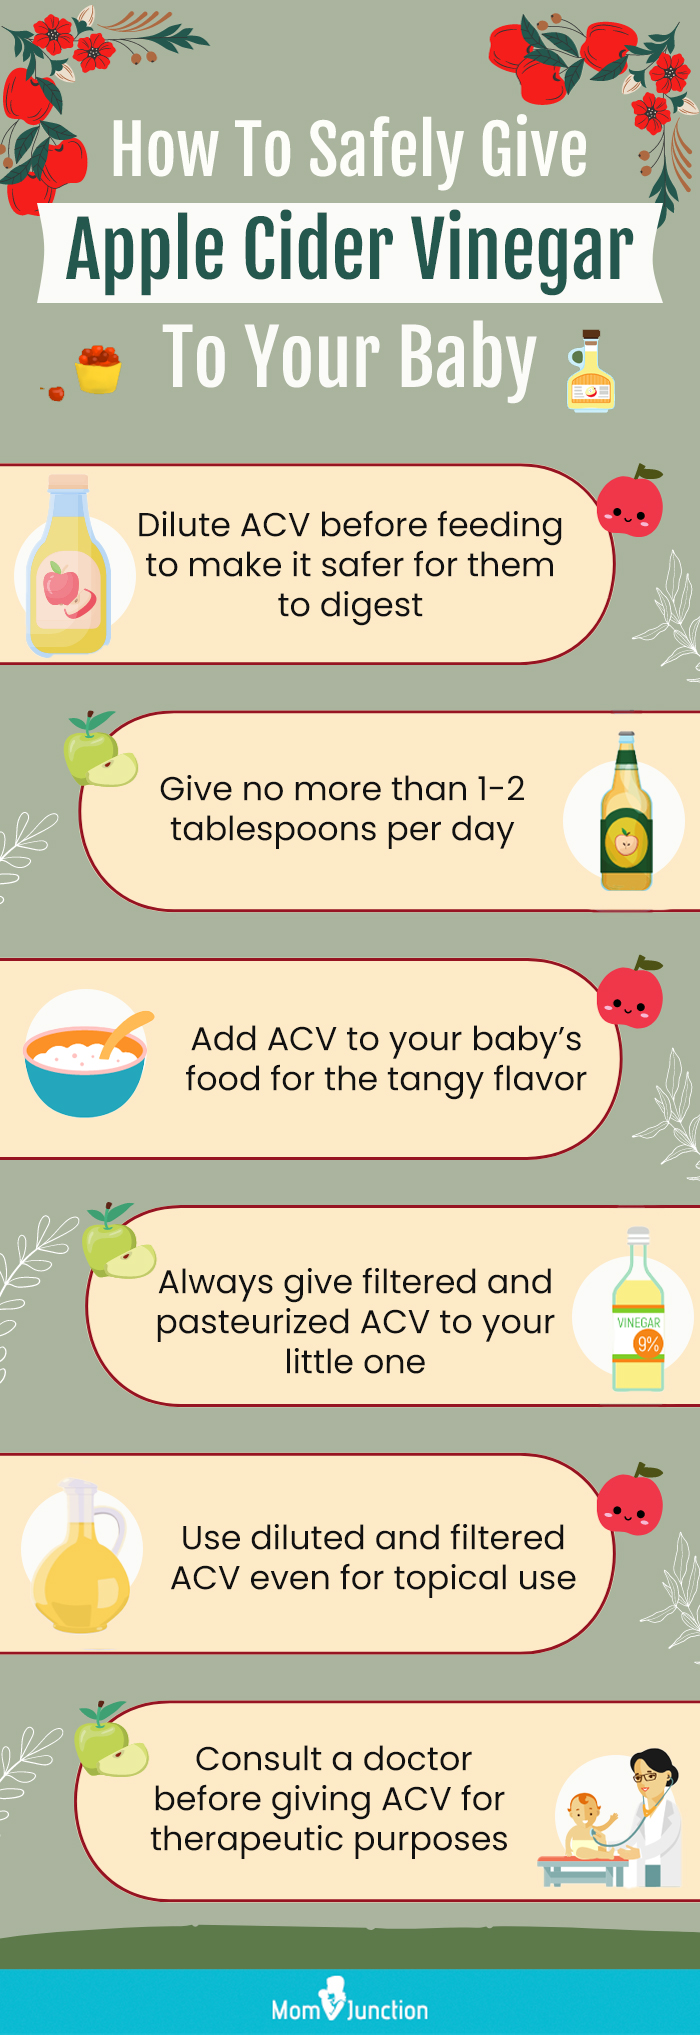 how to safely give apple cider vinegar to your baby (infographic)